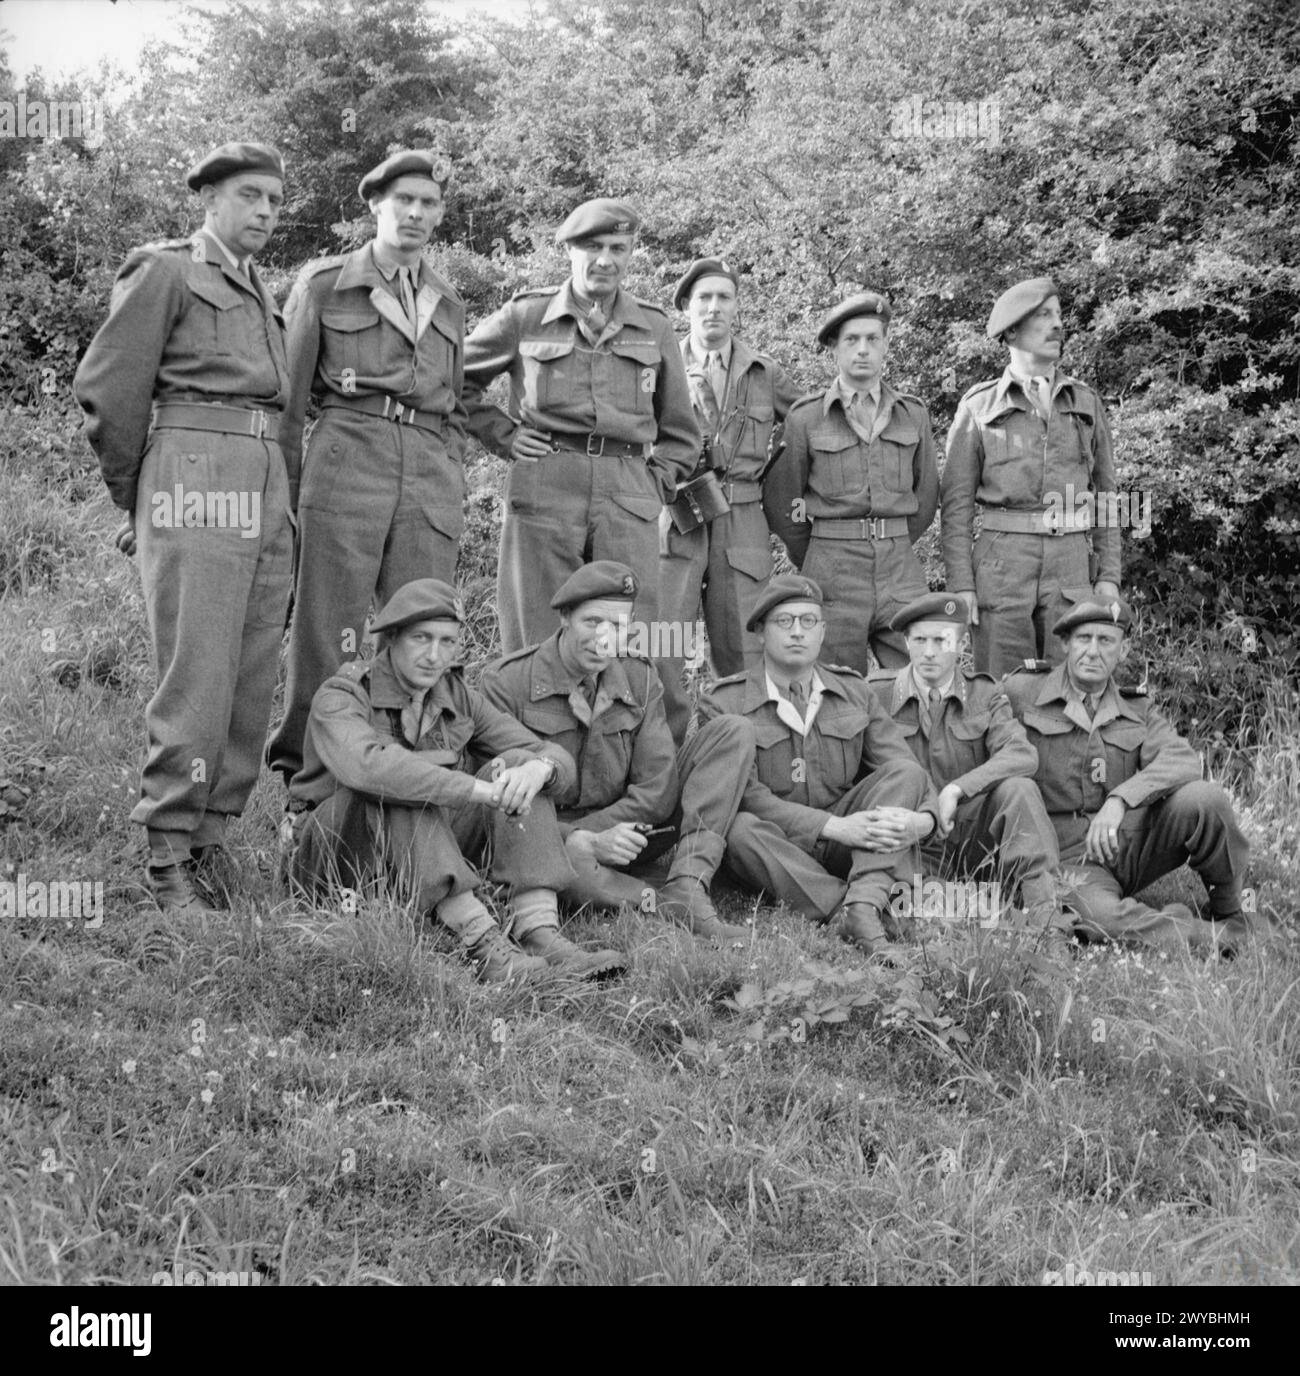 ALLIED ARMIES IN THE UNITED KINGDOM 1940-45 - Group photograph of officers of No. 10 Inter-Allied Commando taken at No. 6 Commando HQs near Brighton.Front row: Lieutenant Stanisław Wołoszowski, the Deputy CO of the 6th Troop (1st Polish Independent Commando Company); Captain Peter Mulders of the 2nd Dutch Troop; Captain George Danloy of the 4th Belgian Troop; Captain R. Hauge of the 5th Norwegian Troop, and Captain Philippe Kieffer, the CO of the 1st French Troop.Back row: Captain E. F. Lutyens, the 4th Belgian Troop; Captain J. G. Clarke, Adjutant; Lieutenant Colonel Dudley Lister, the CO of Stock Photo